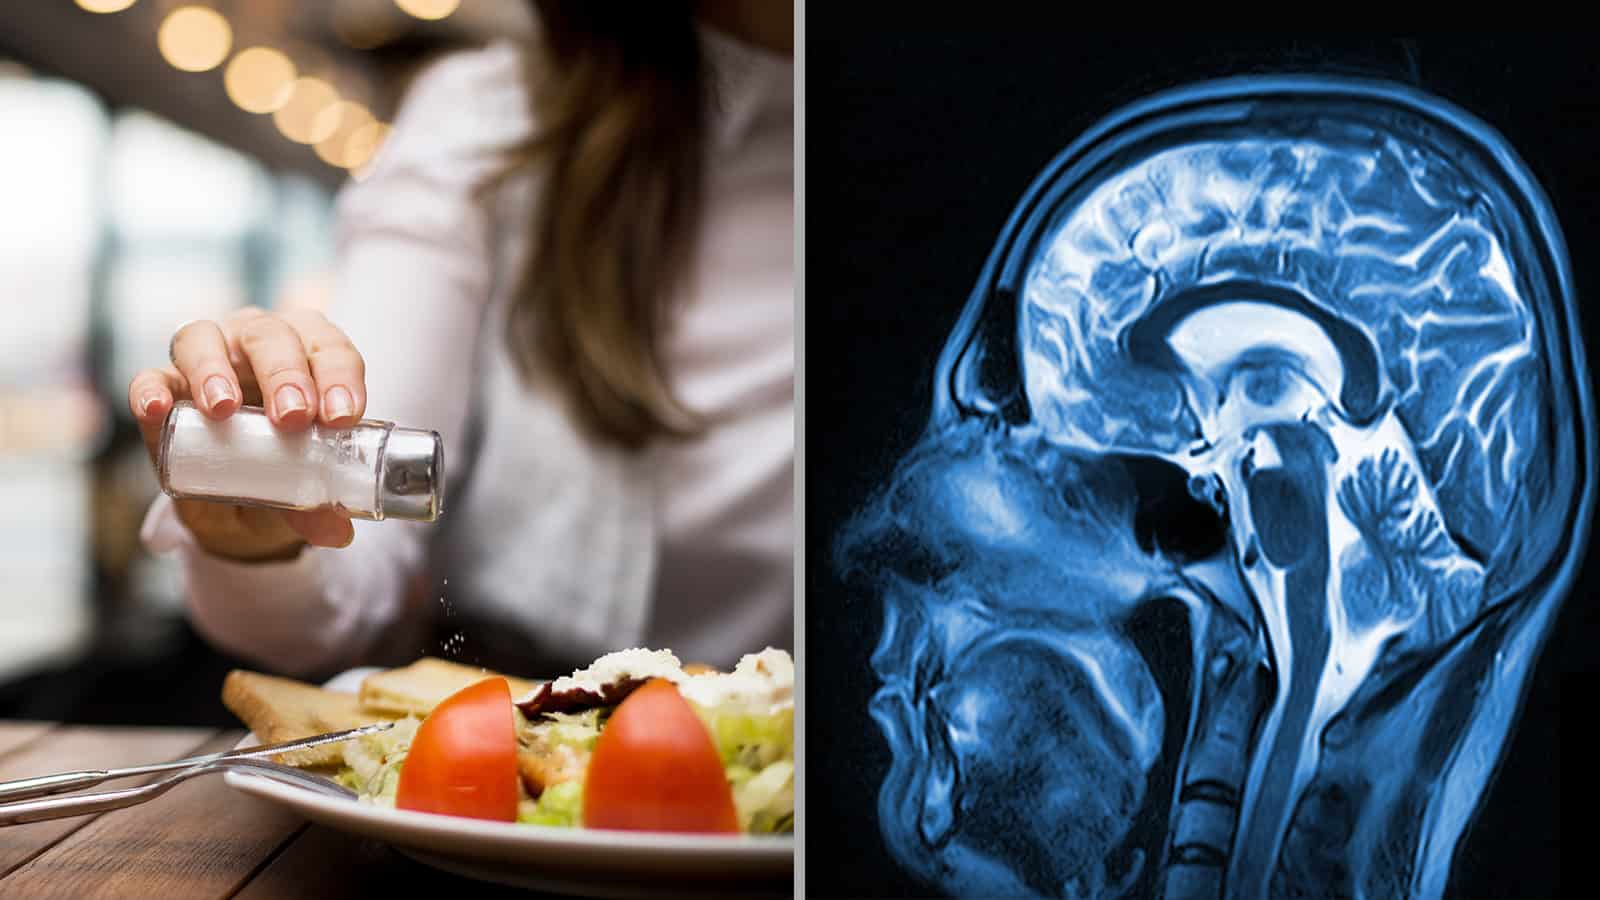 Researchers Explain a Link Between Eating Salty Foods and Brain Health